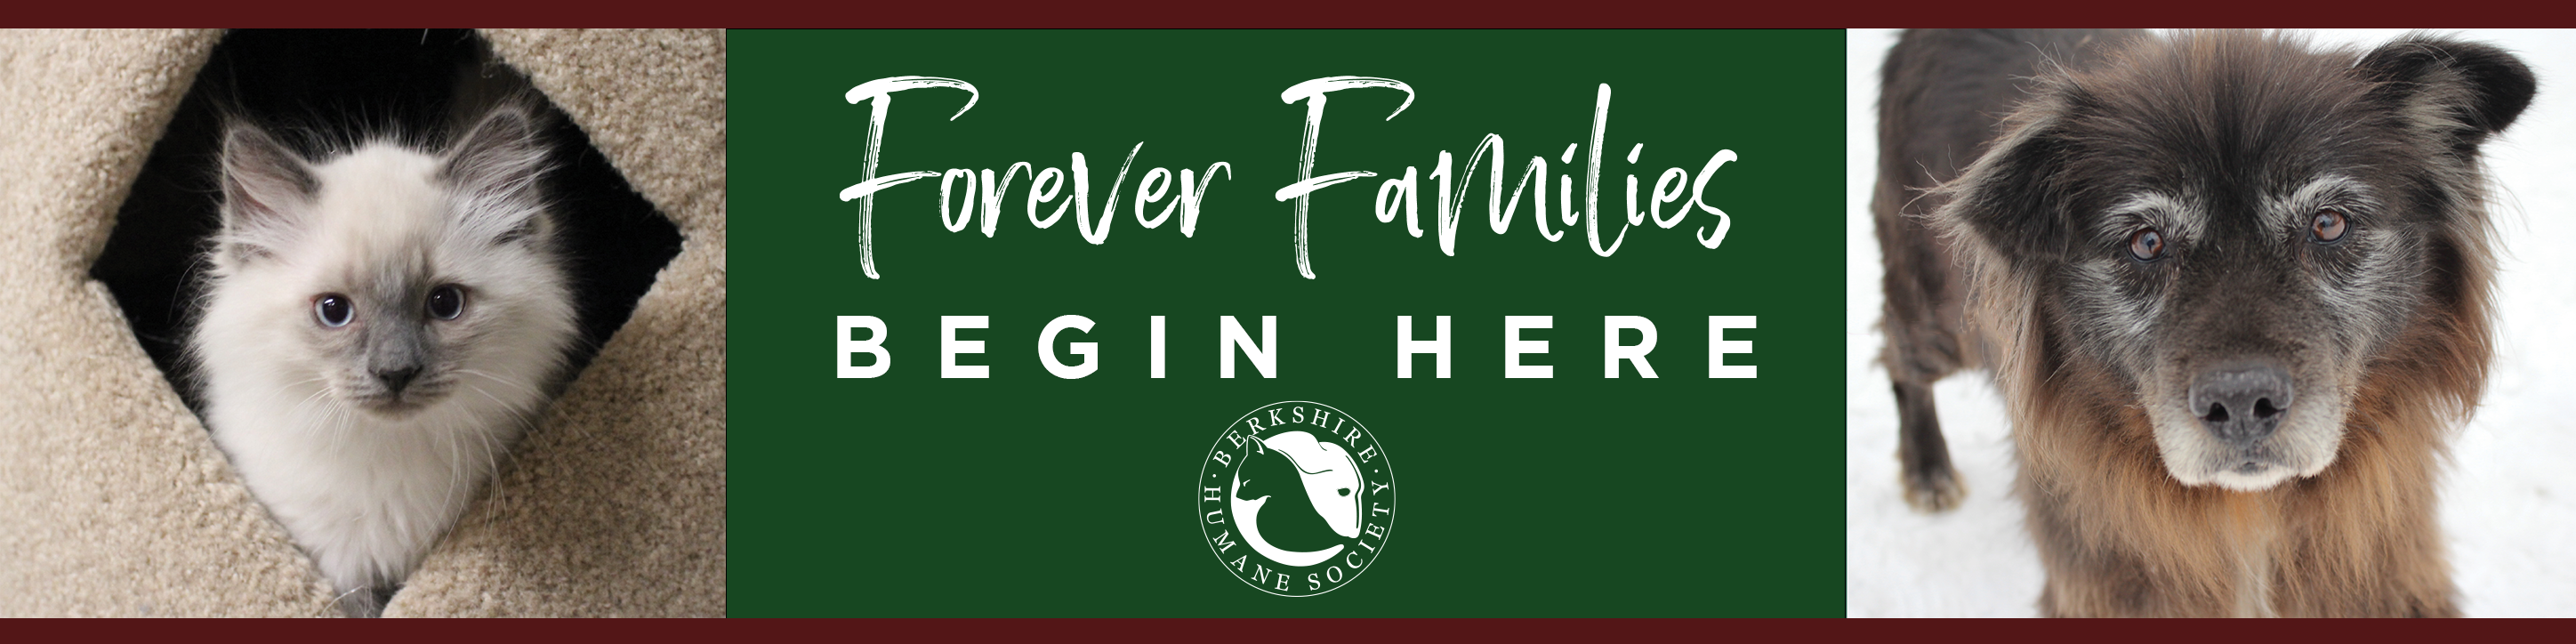 Forever Family Campaign